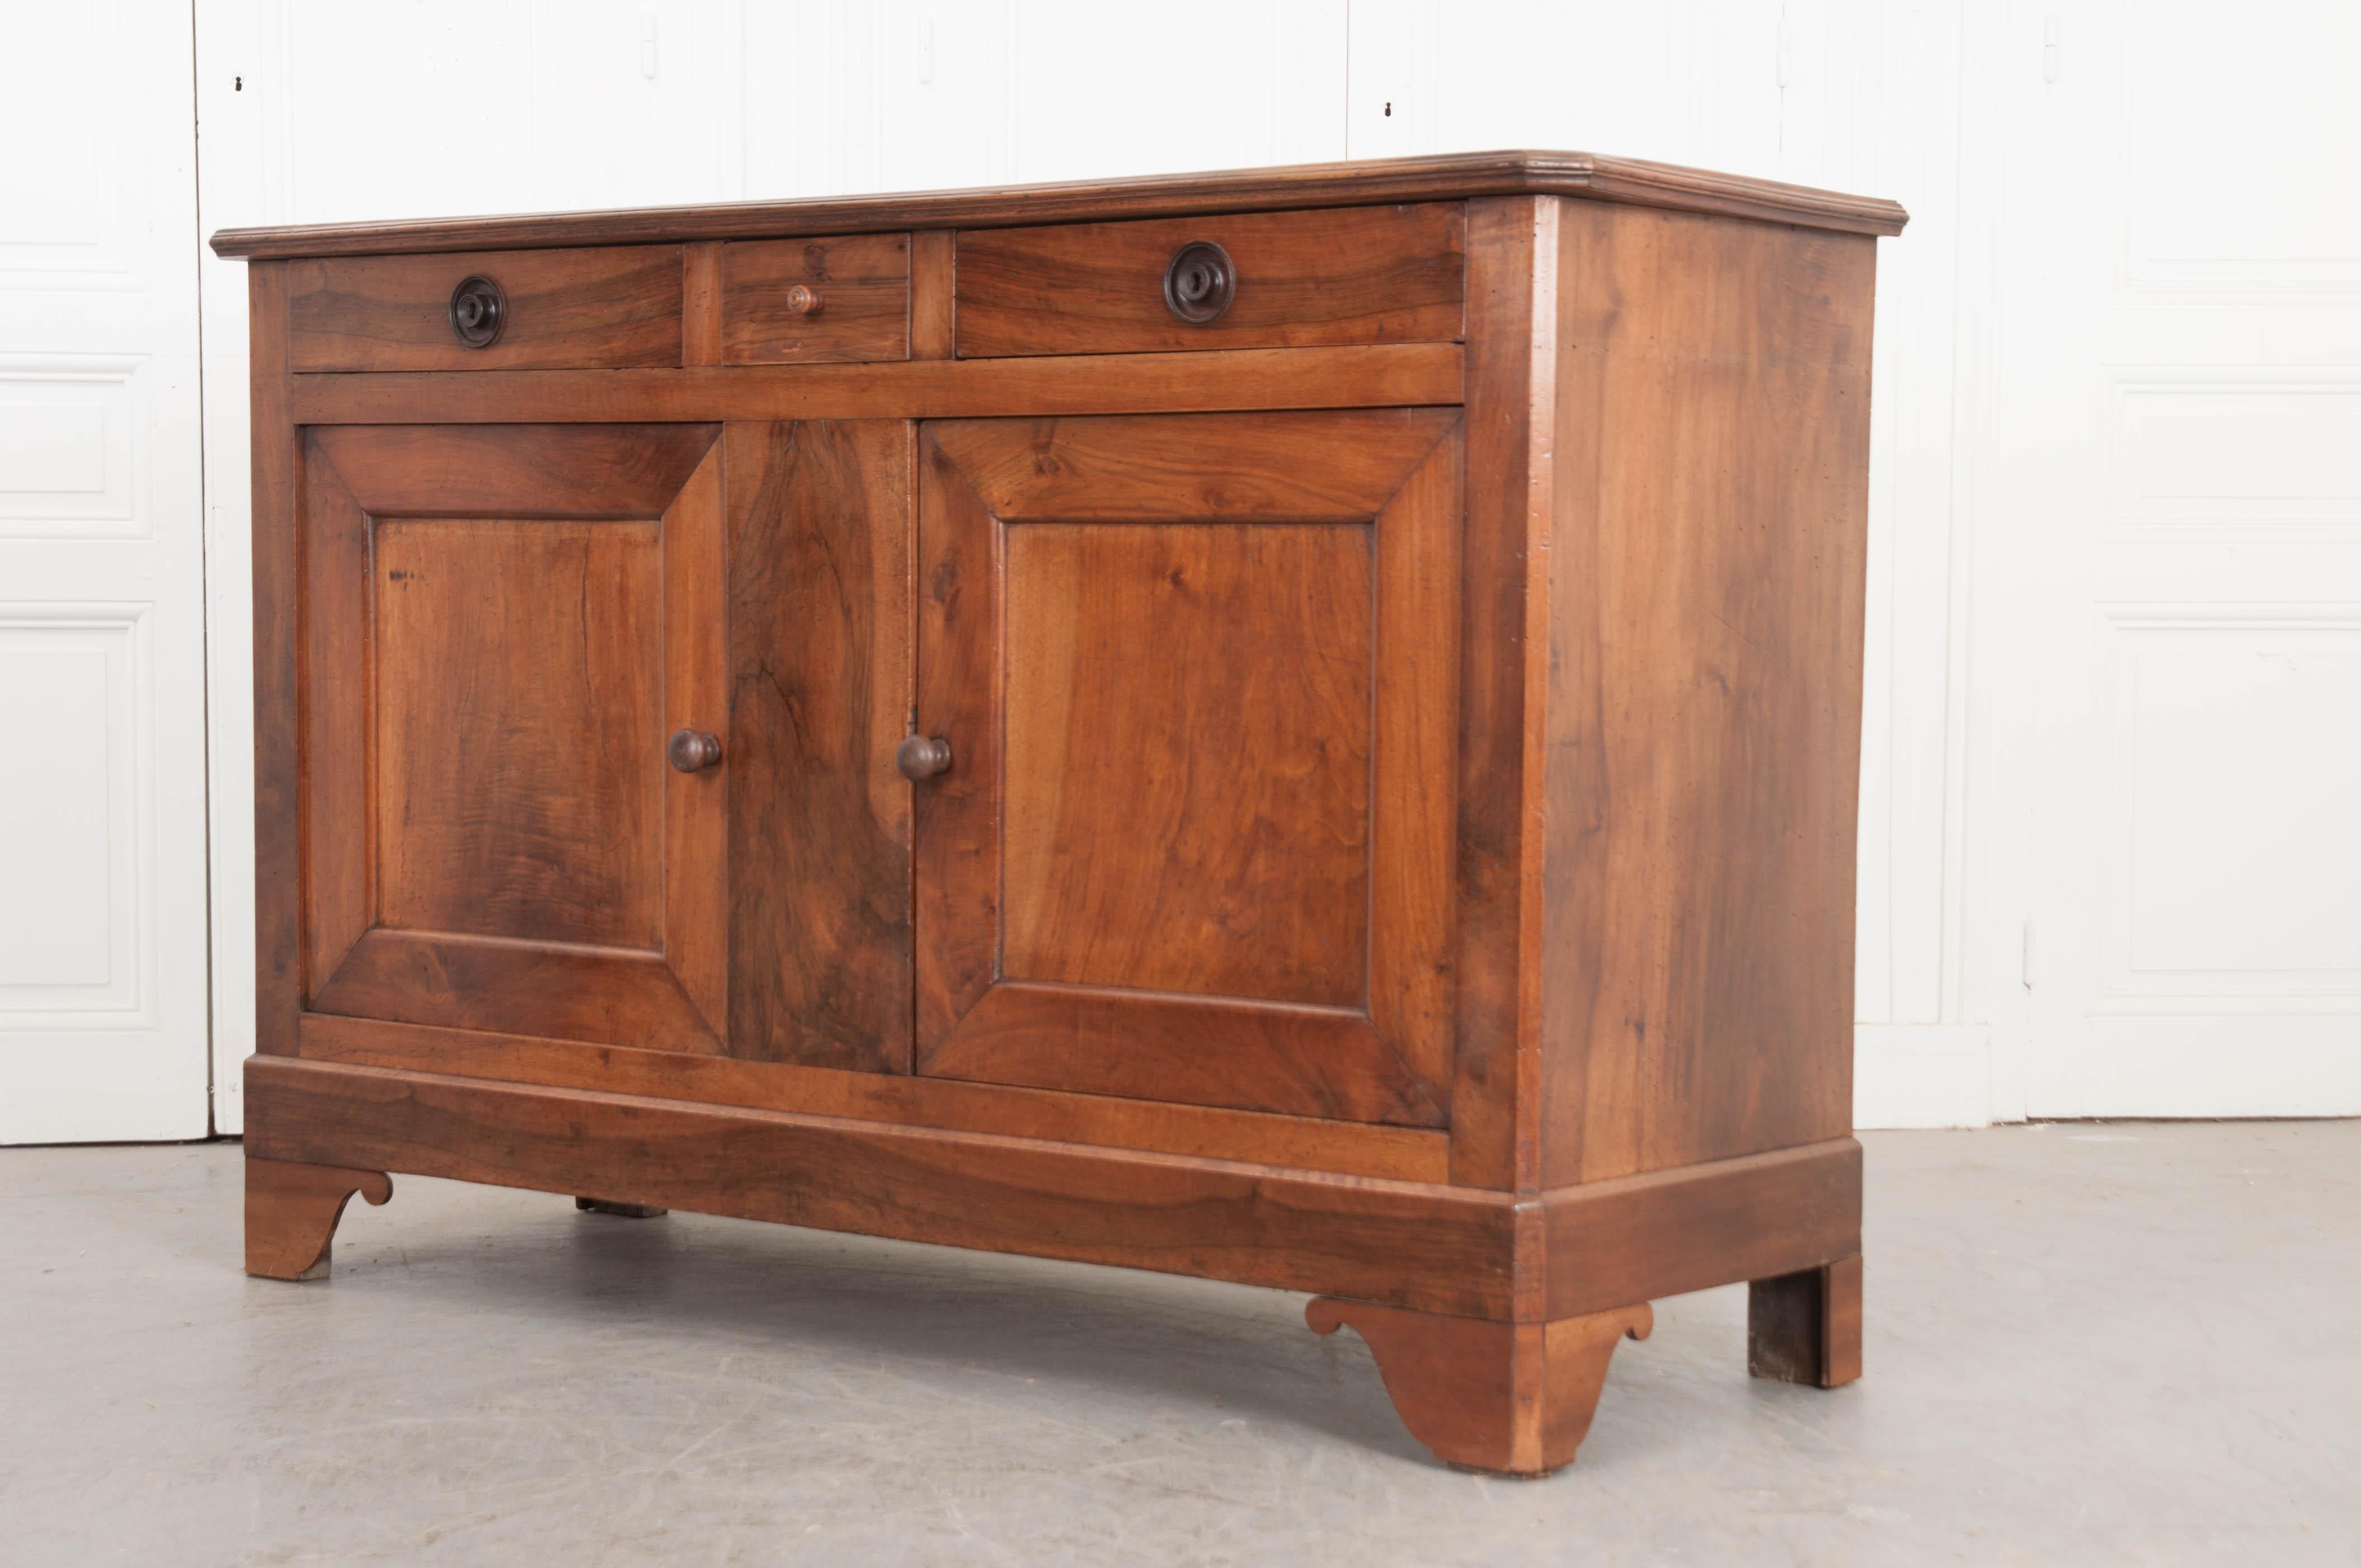 This wonderful 19th century French provincial walnut buffet, circa 1870s has a rich, warm finish that is beautifully highlighted by a professional French polish. It features a small central drawer flanked by a pair of larger ones, each having turned